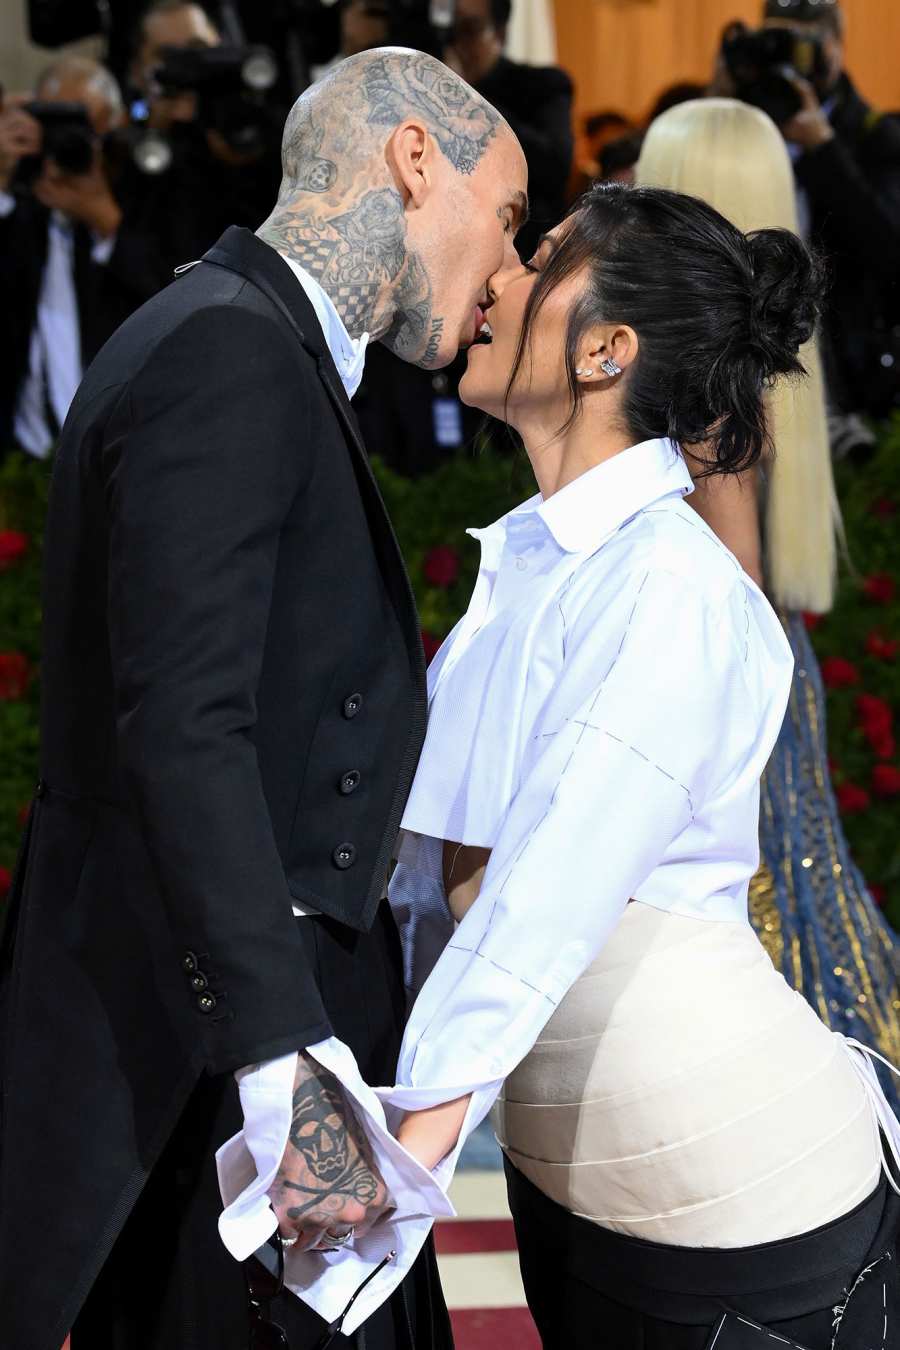 Kourtney Kardashian and Travis Barker Pack on the PDA at 2022 Met Gala 2022 After Skipping the Event 1 Year Prior 02